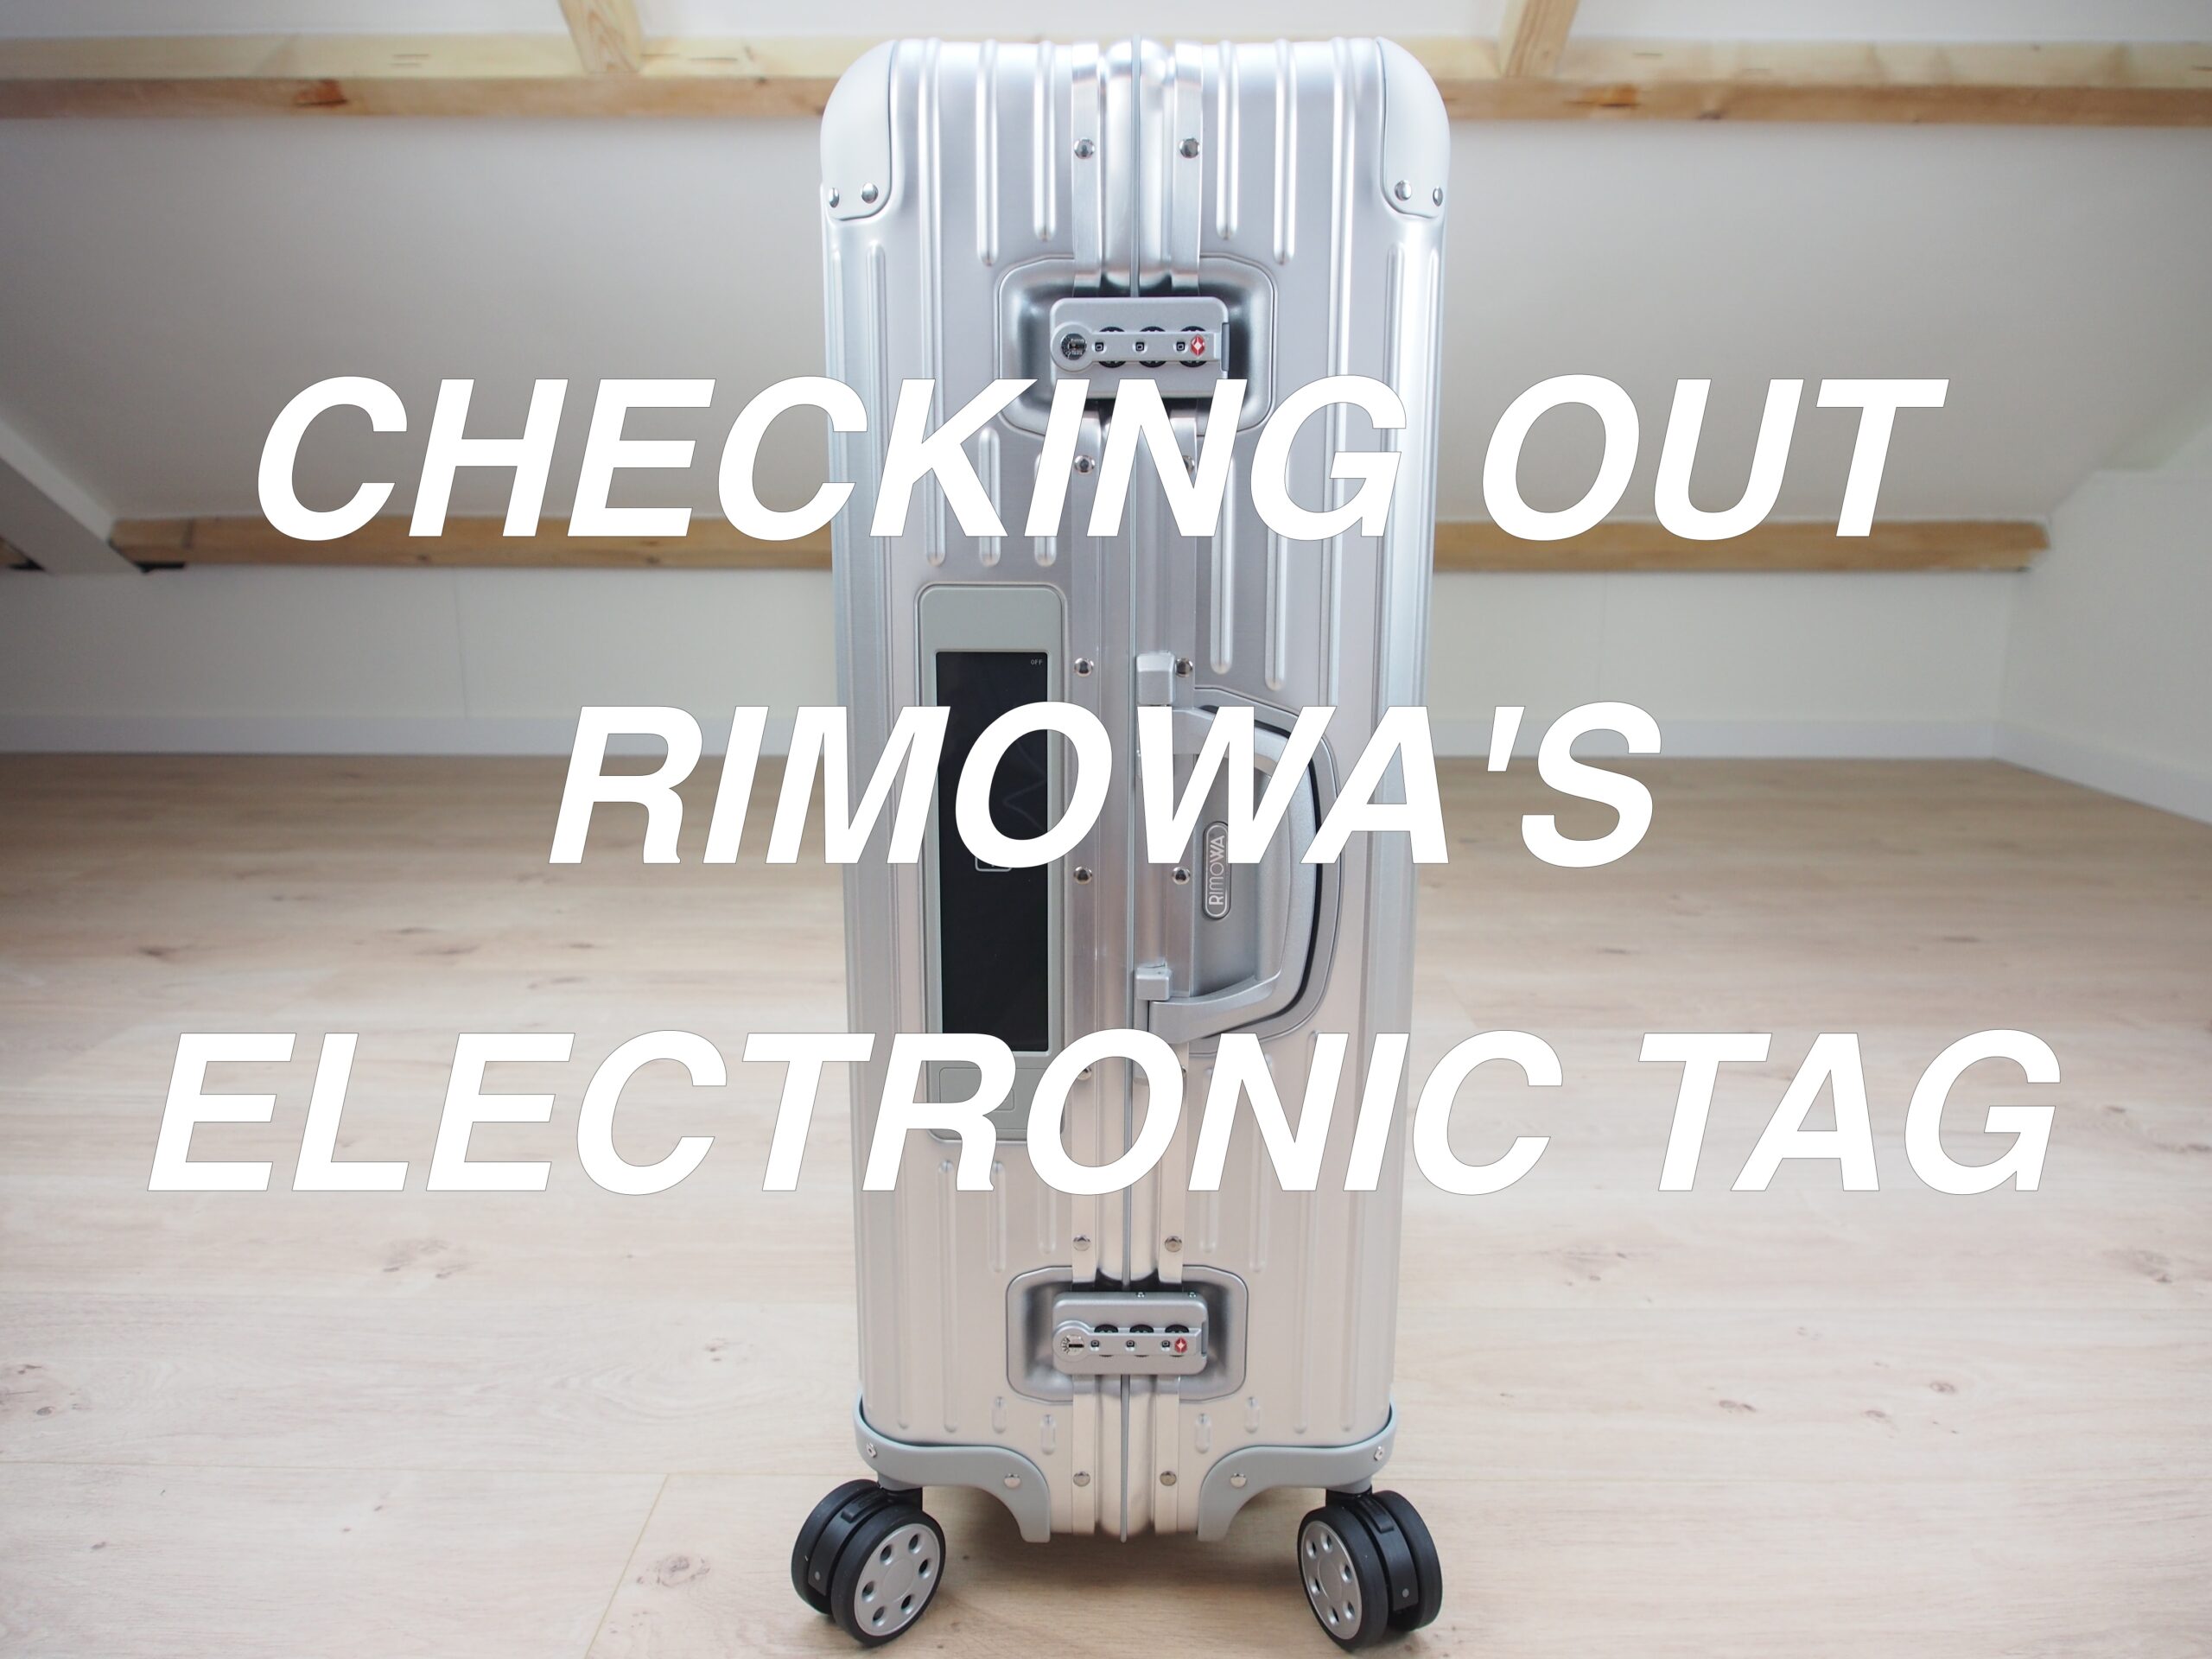 Checking out Rimowa’s Electronic Tag